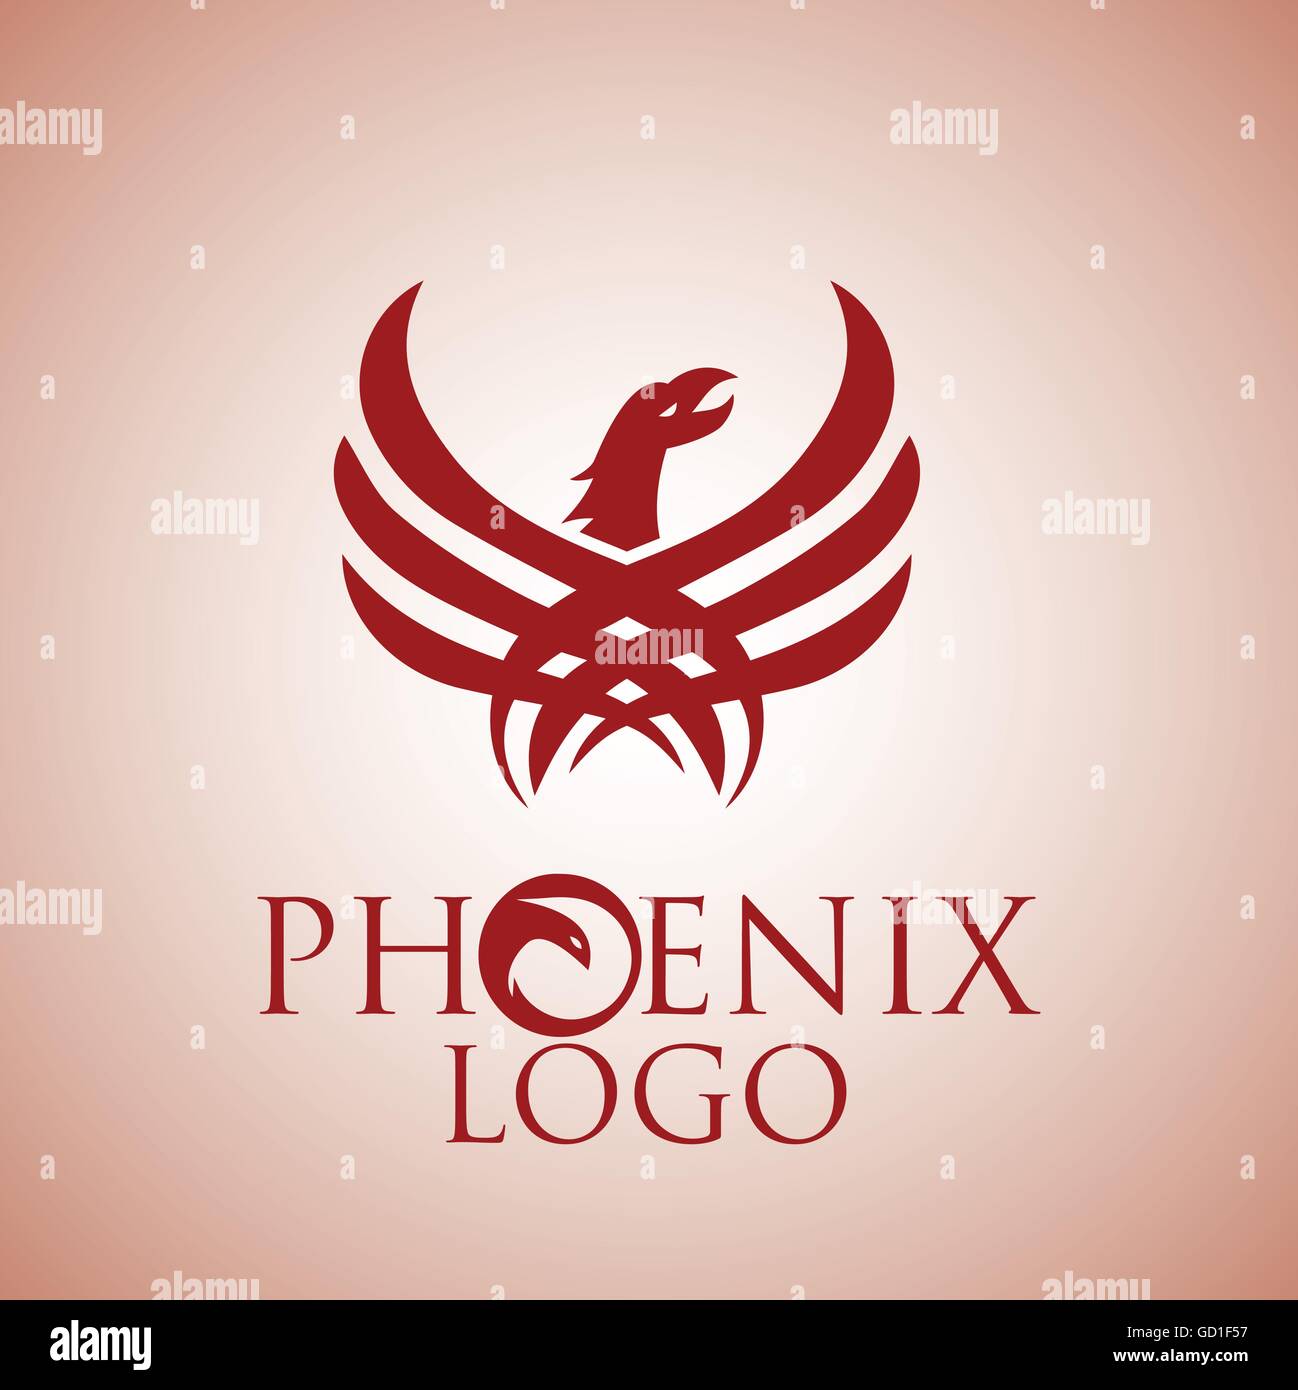 Phoenix Logo Designed In A Simple Way So It Can Be Use For Multiple Proposes Like Logo Mark Symbol Or Icon Stock Vector Image Art Alamy